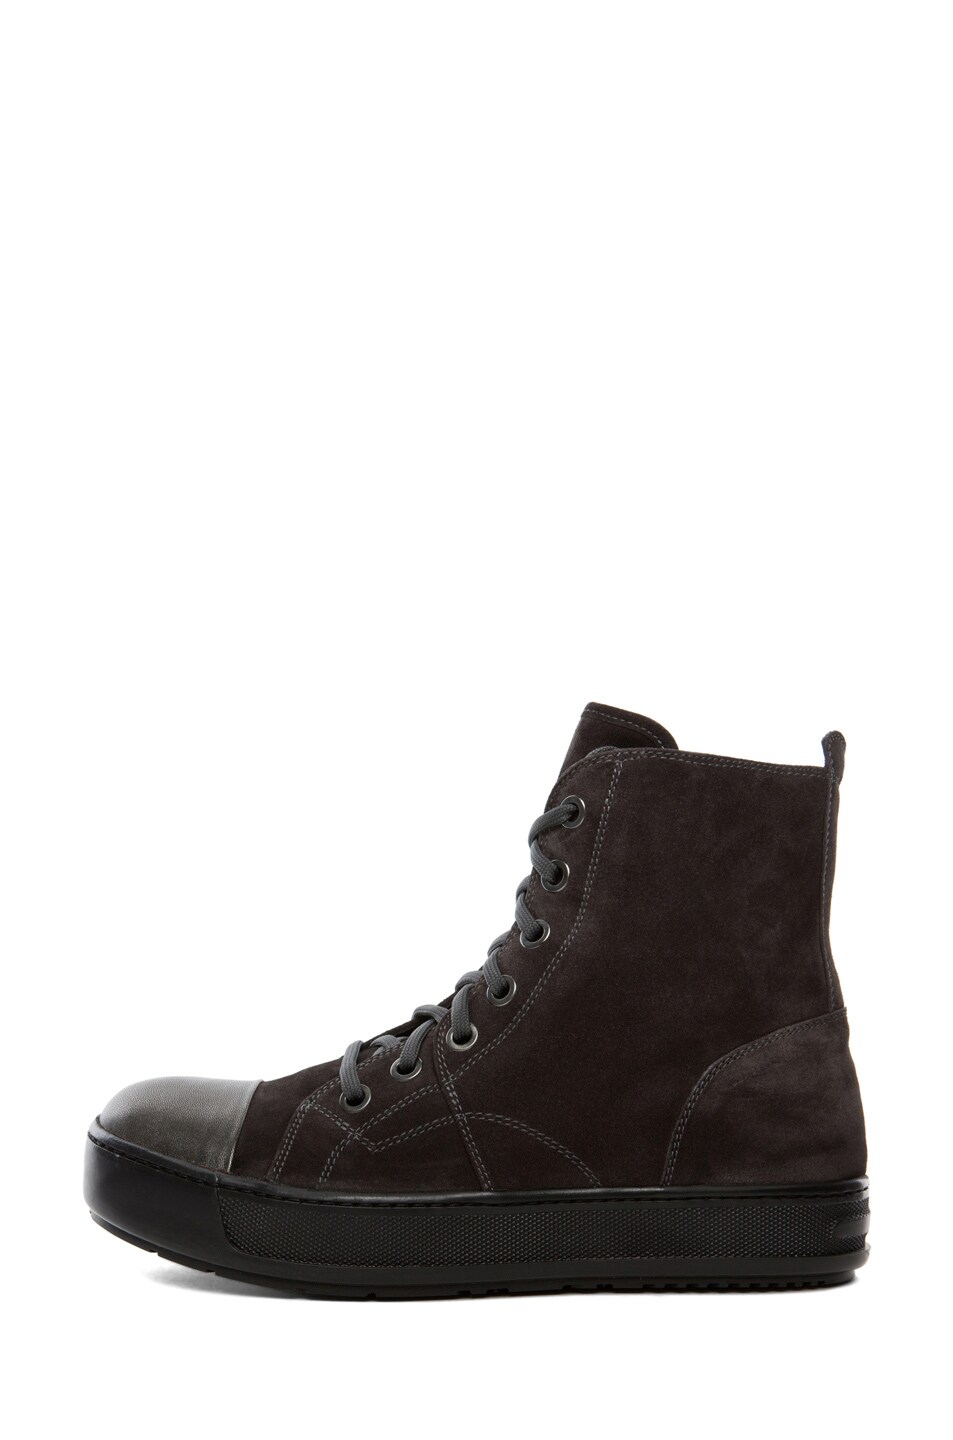 Image 1 of Neil Barrett Boot Trainer in Charcoal